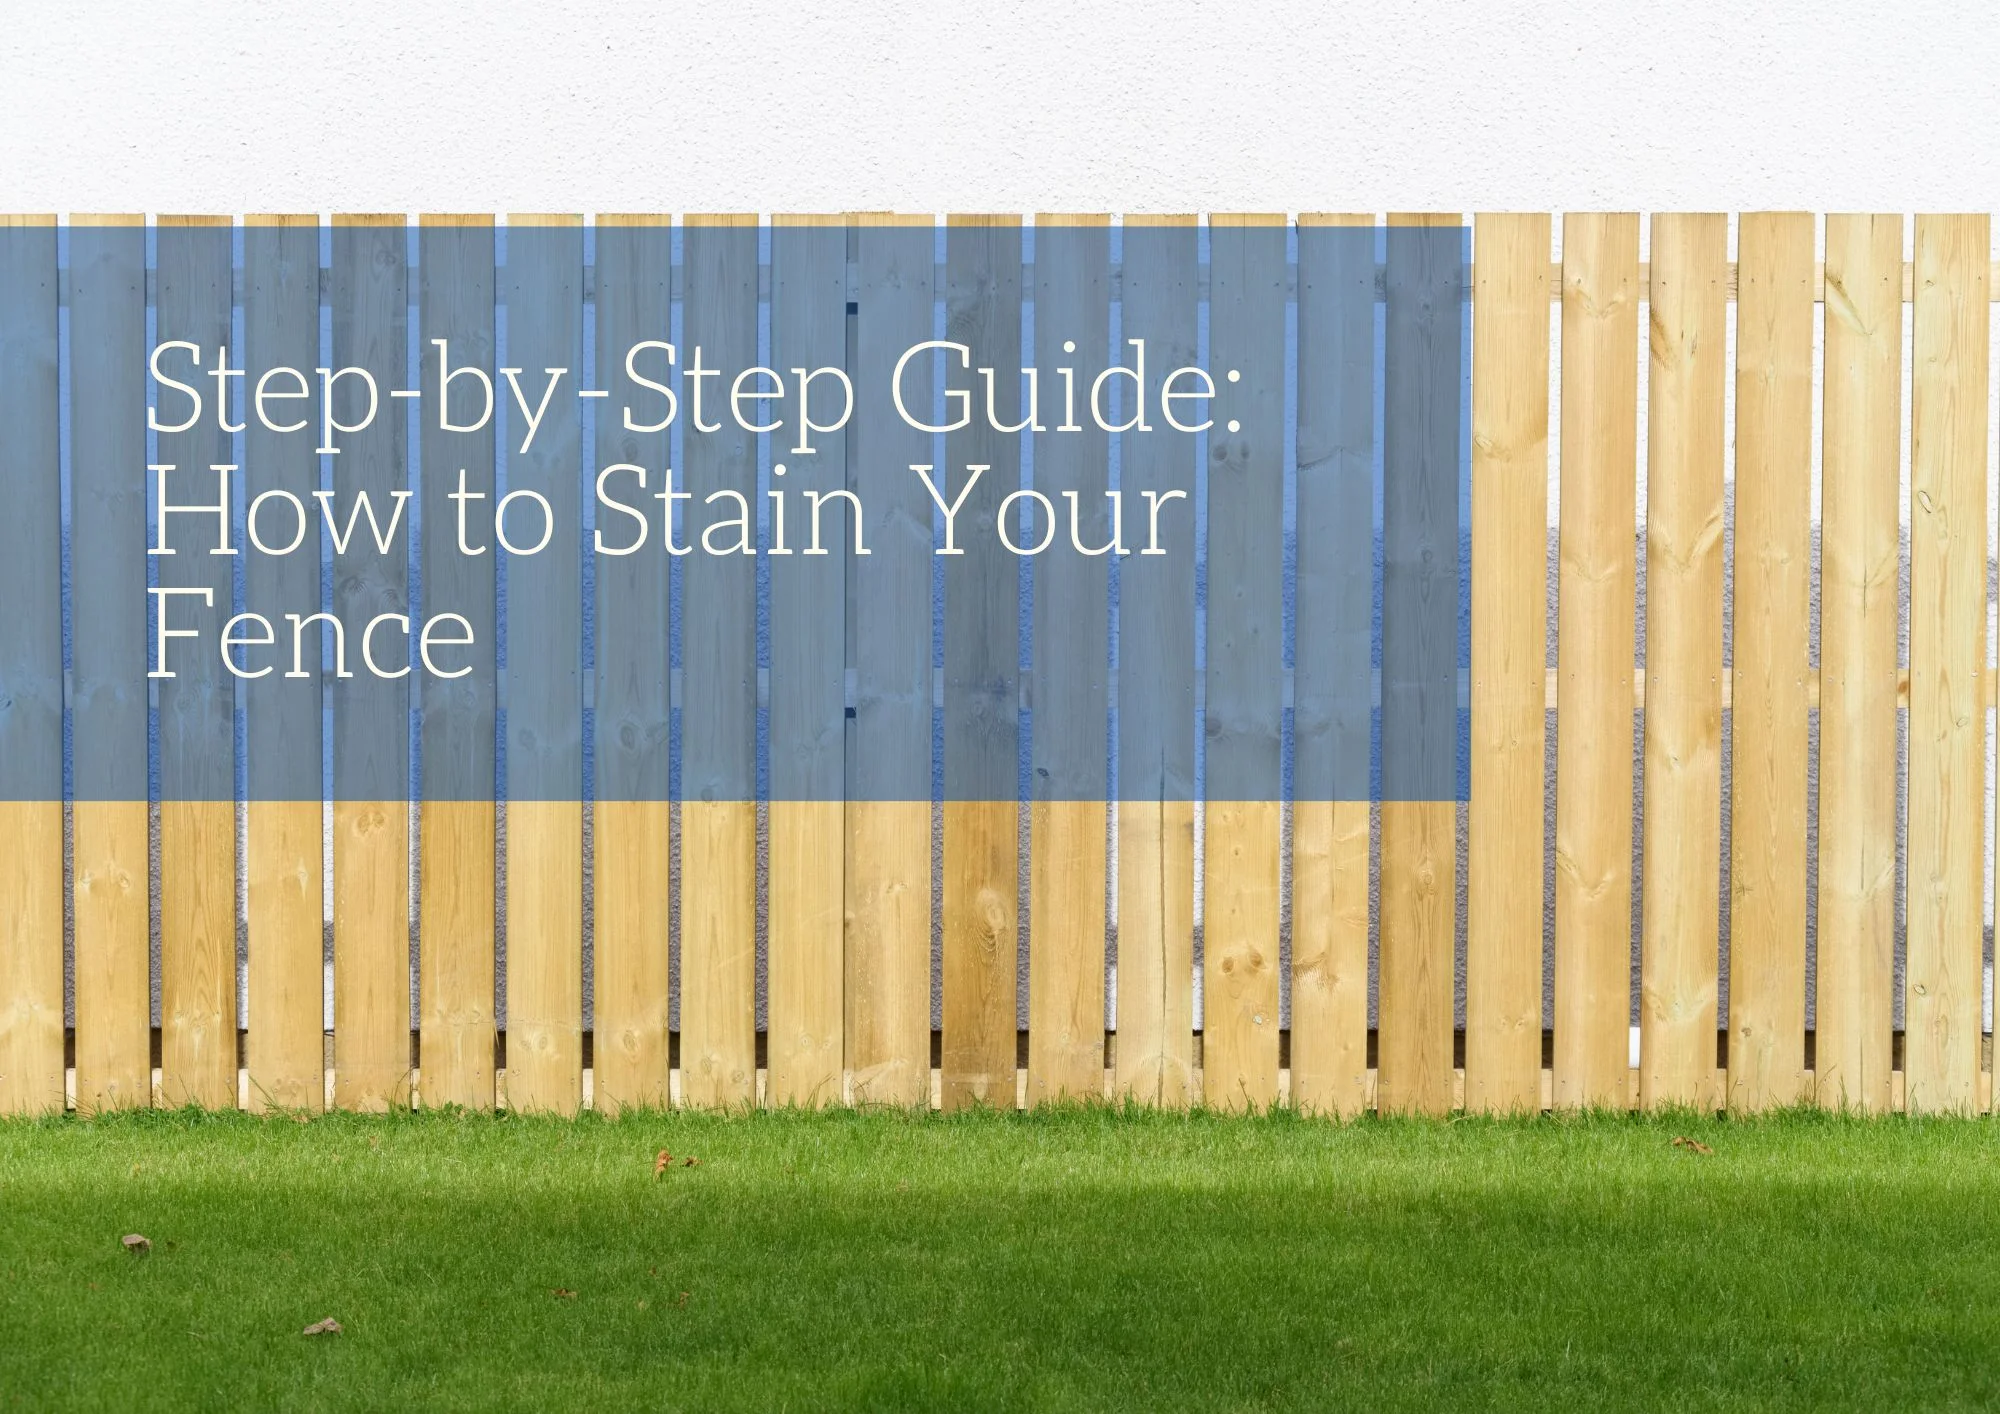 Step-by-Step Guide: How to Stain Your Fence